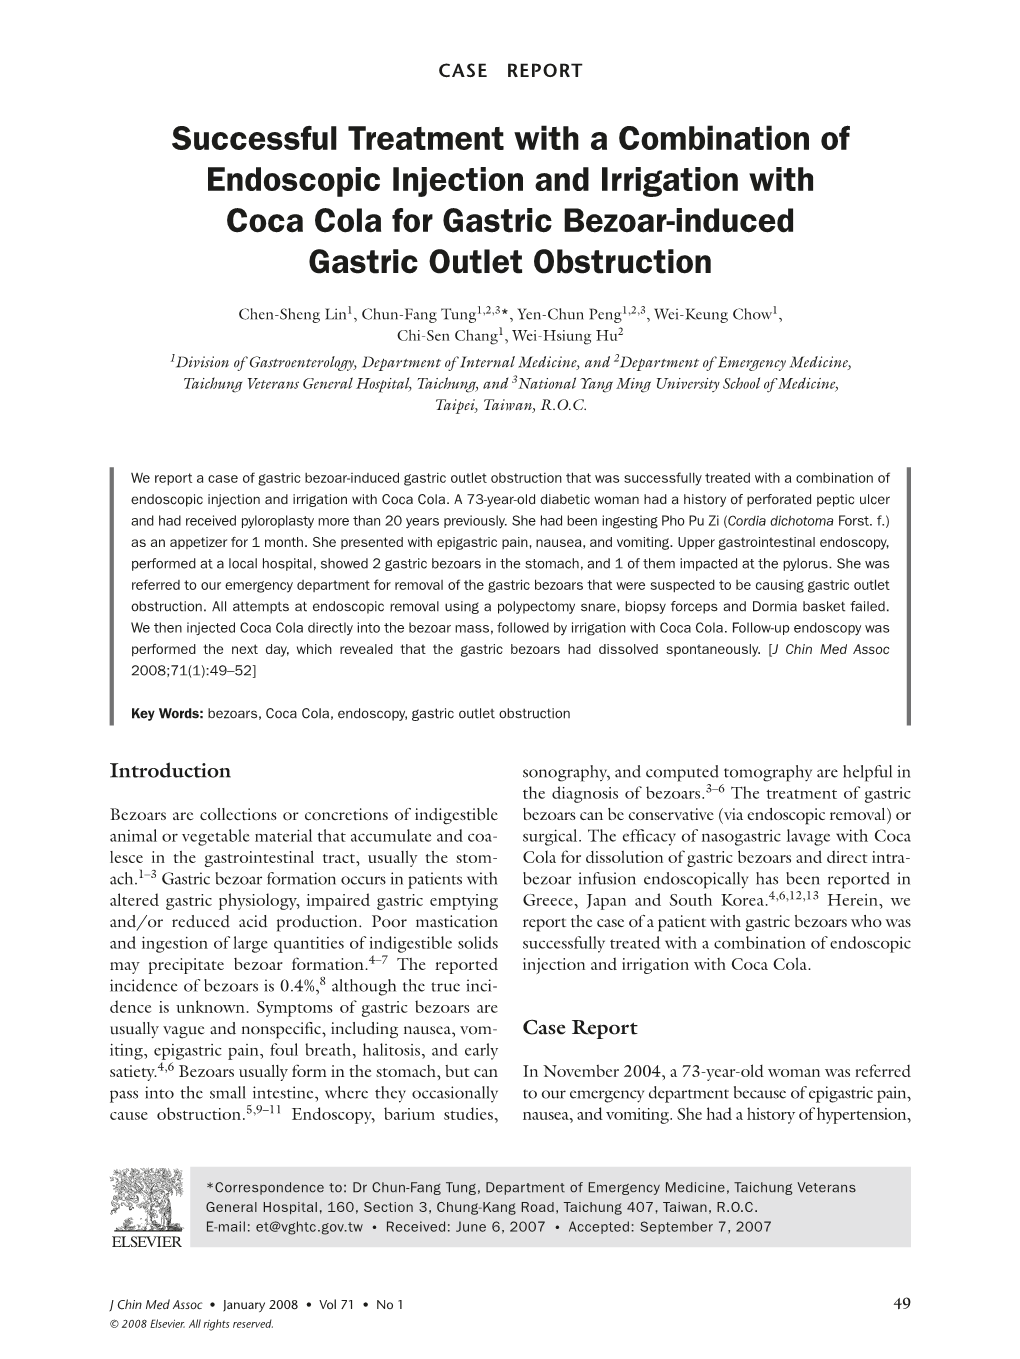 Successful Treatment with a Combination of Endoscopic Injection and Irrigation with Coca Cola for Gastric Bezoar-Induced Gastric Outlet Obstruction